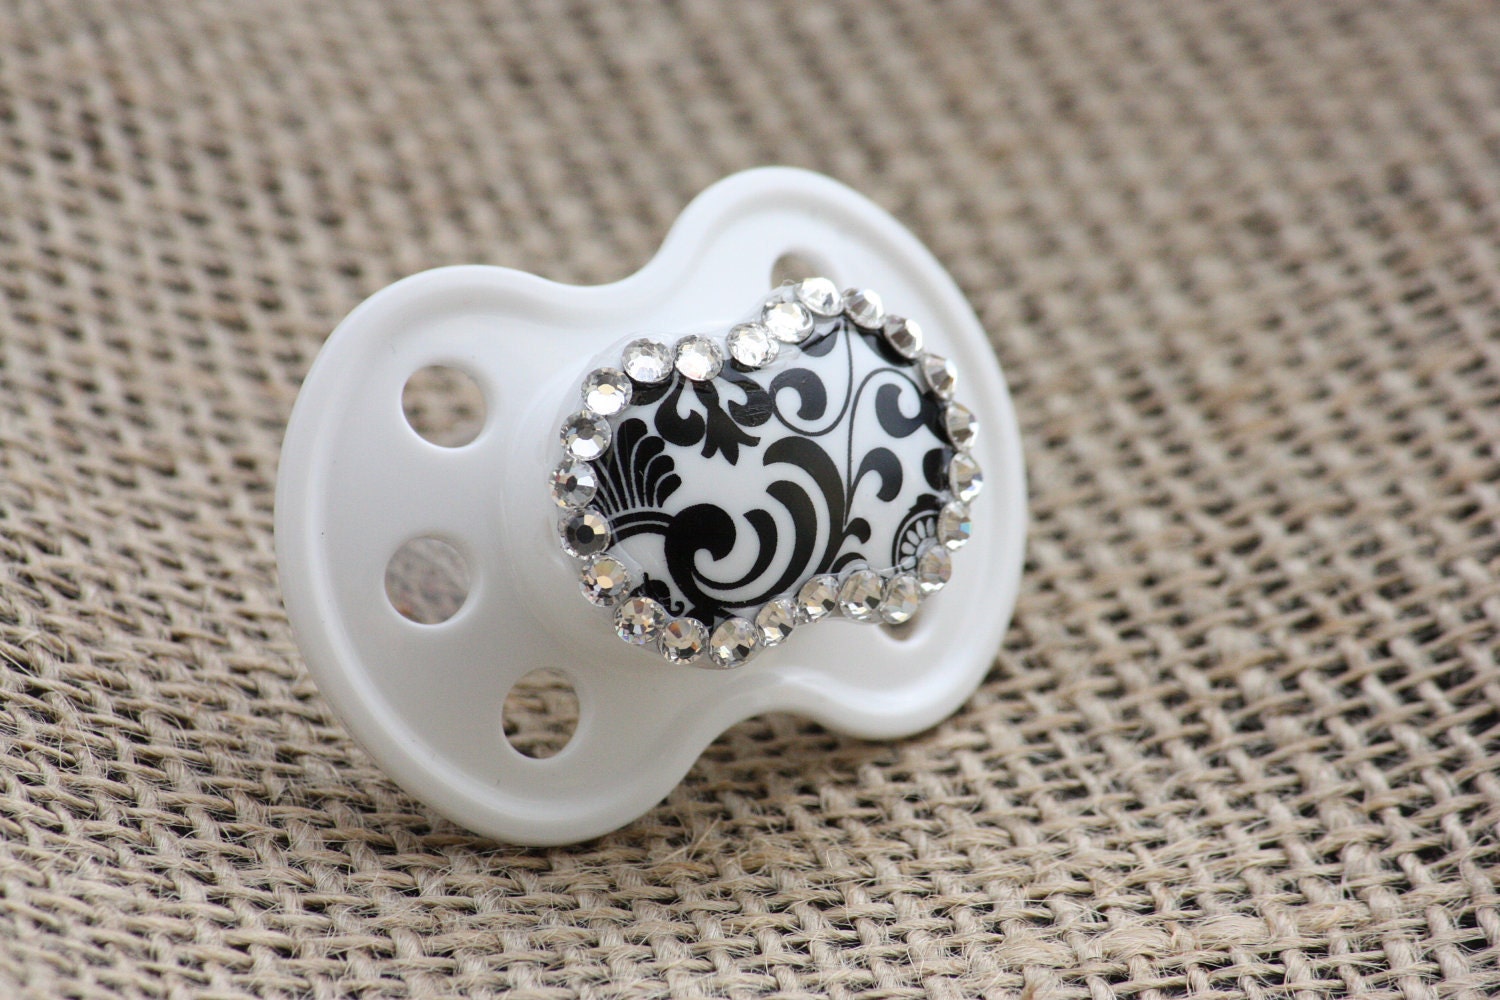 Damask  Bling Binky, White and Black DAMASK Bling Pacifier, Binky, Paci 0-6 Months, made with Swarovski Crystals